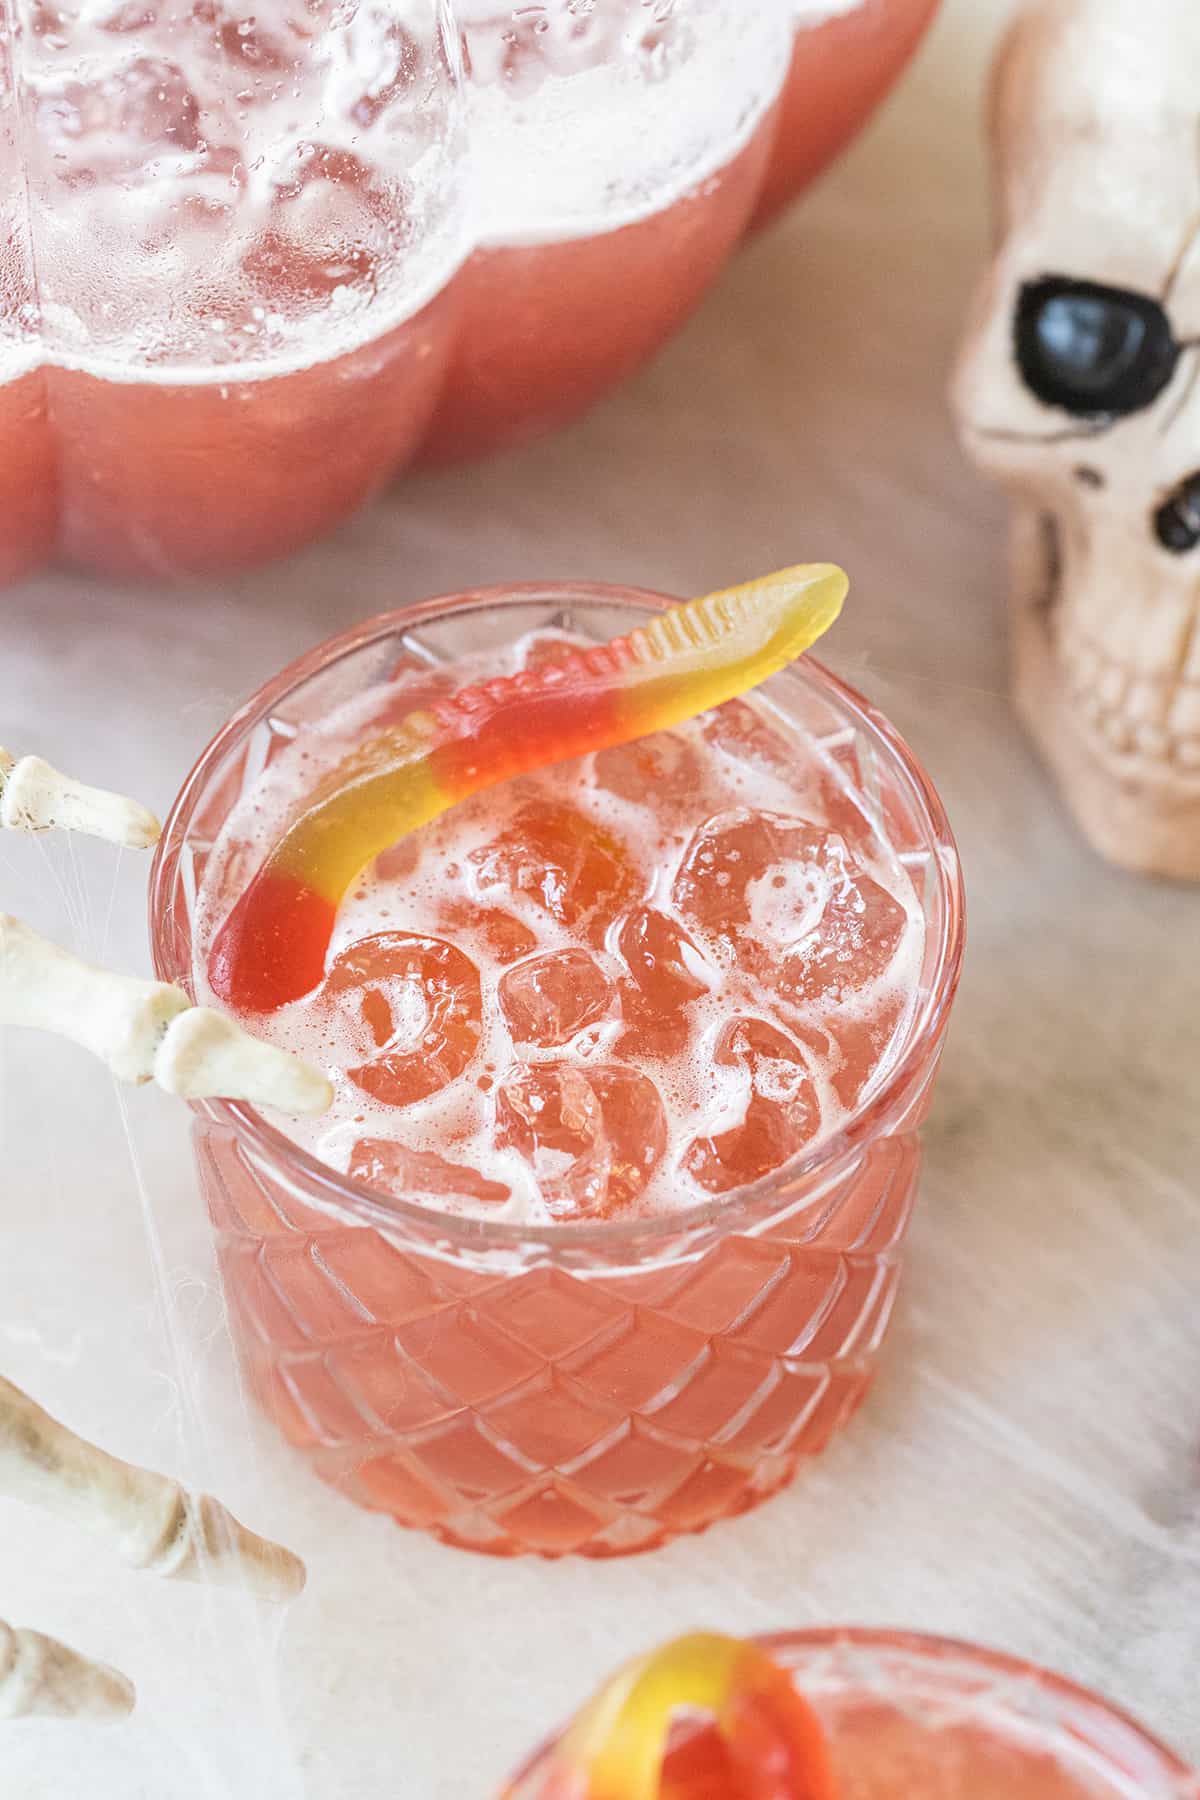 pink drink in a glass with a gummy worm and skeleton hand.